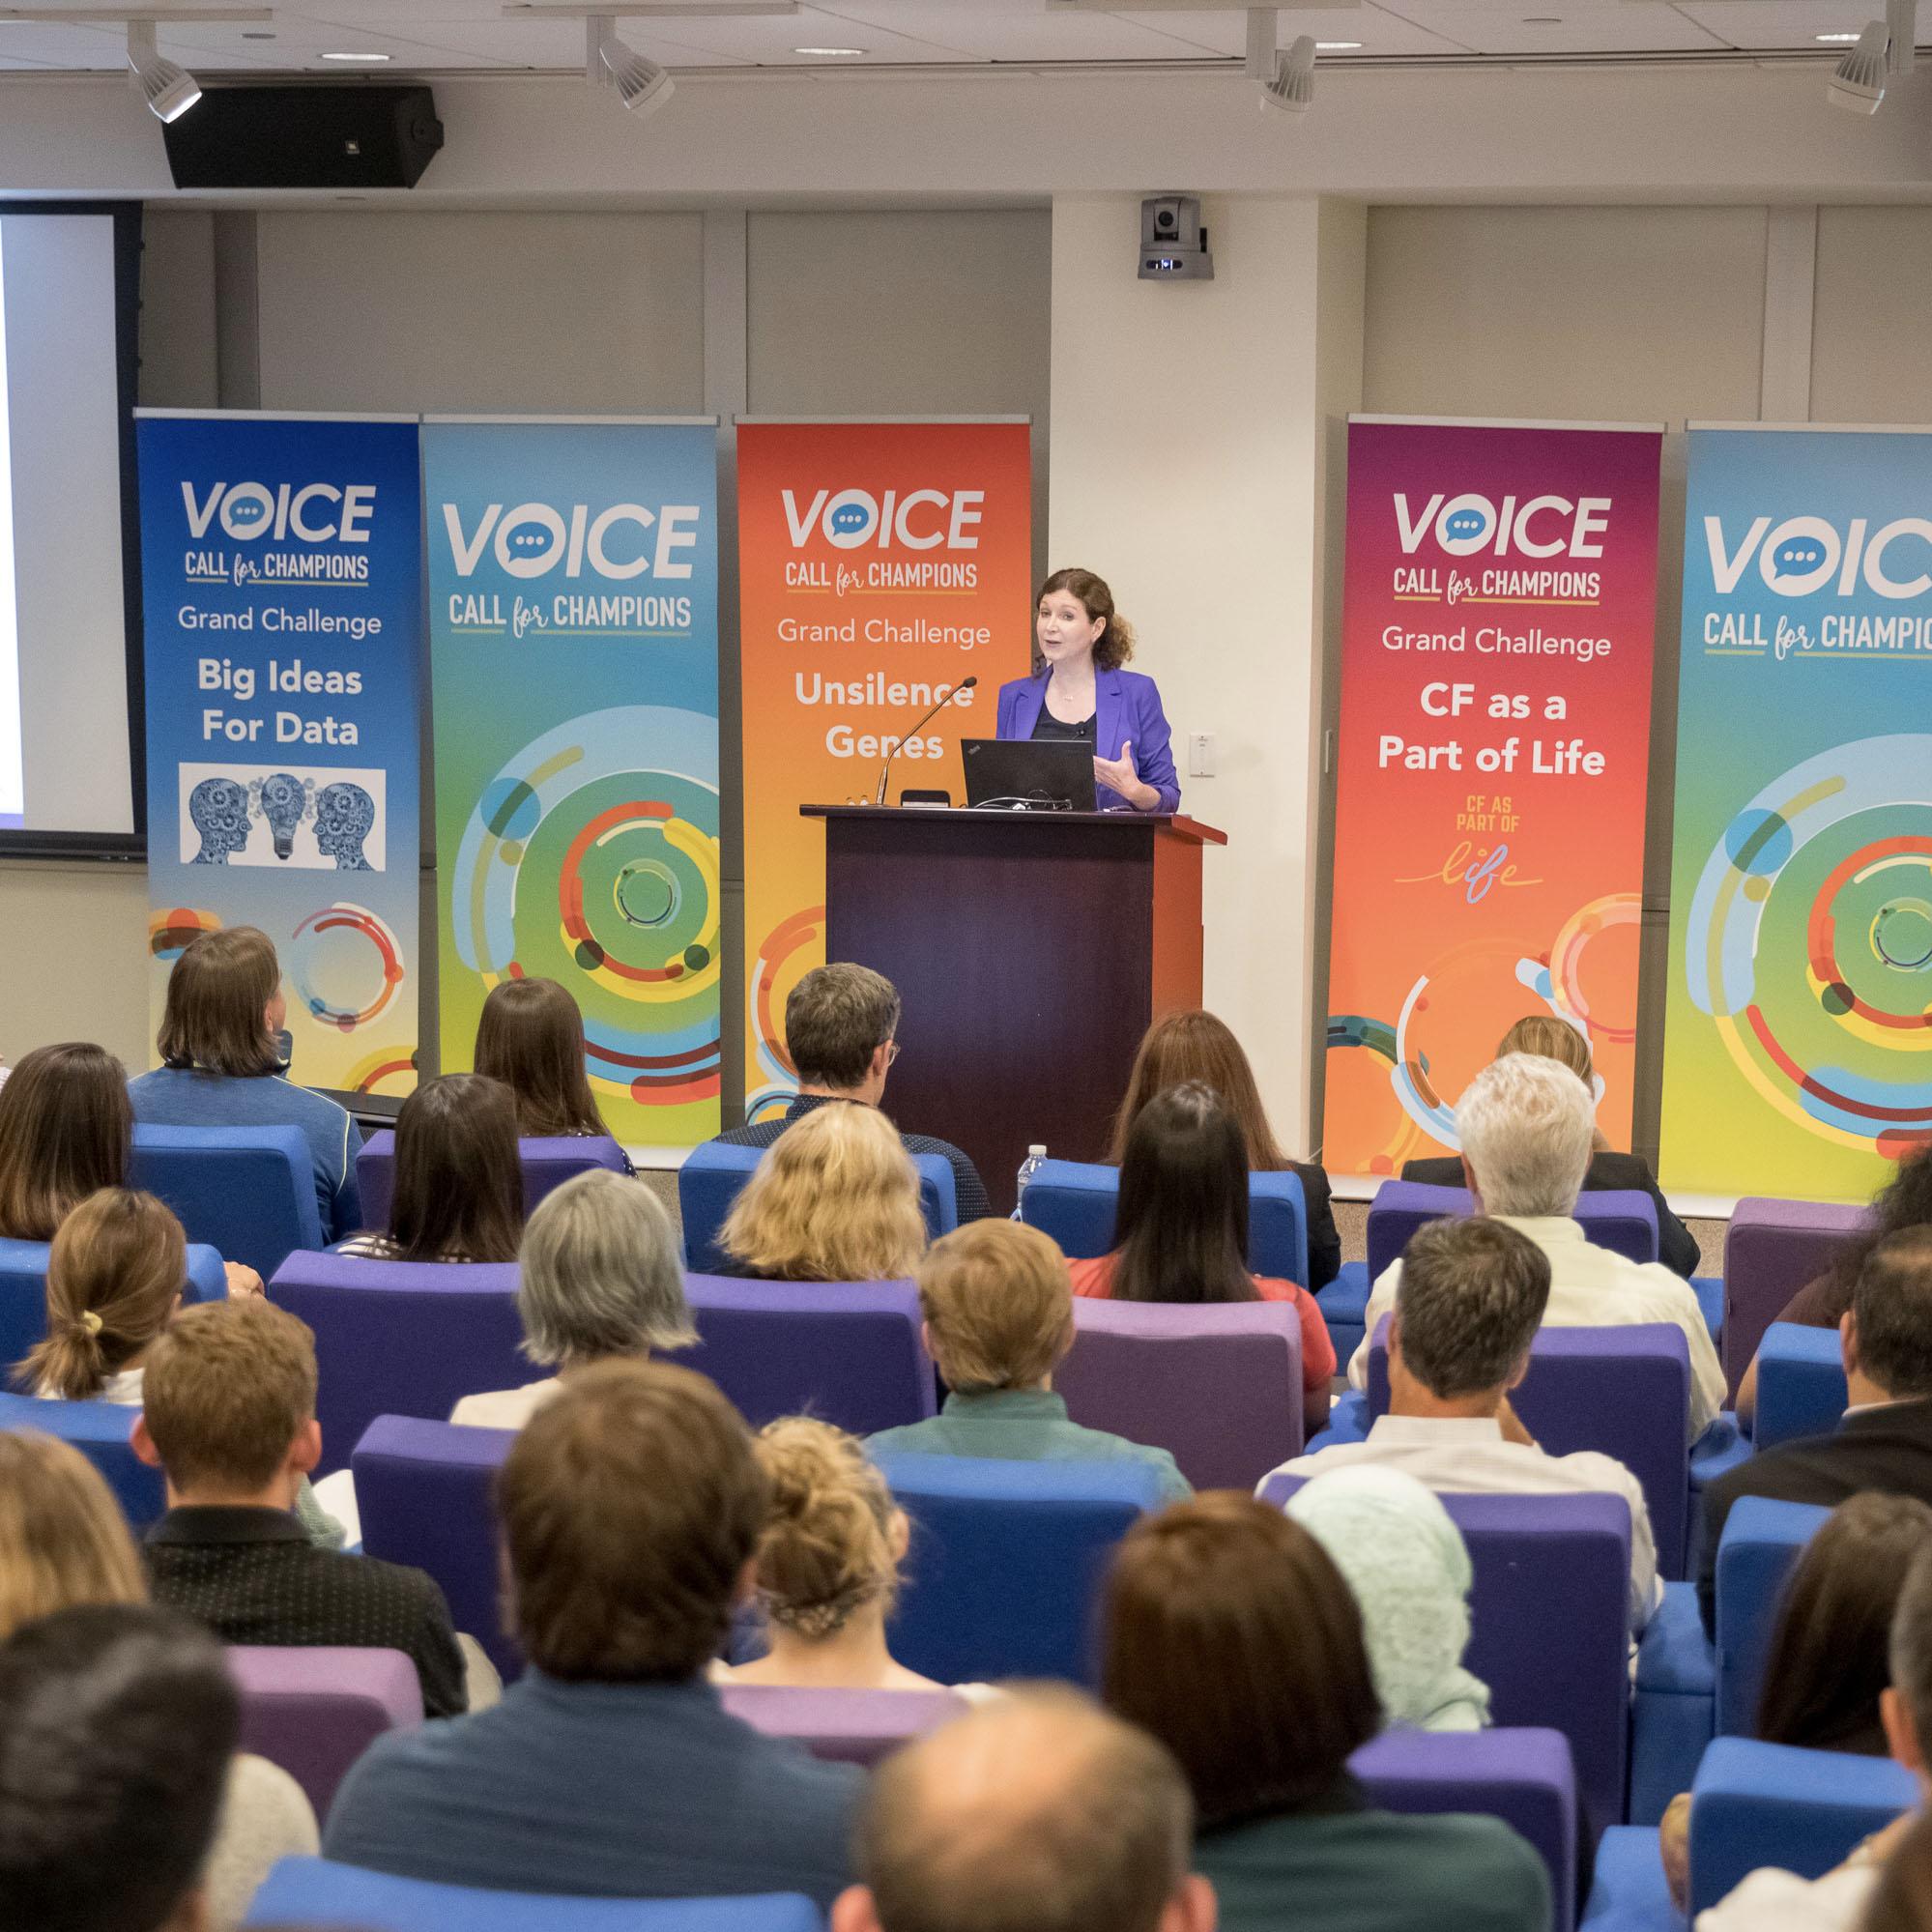 A woman presents in the Vertex Pharmaceuticals auditorium during the VOICE program